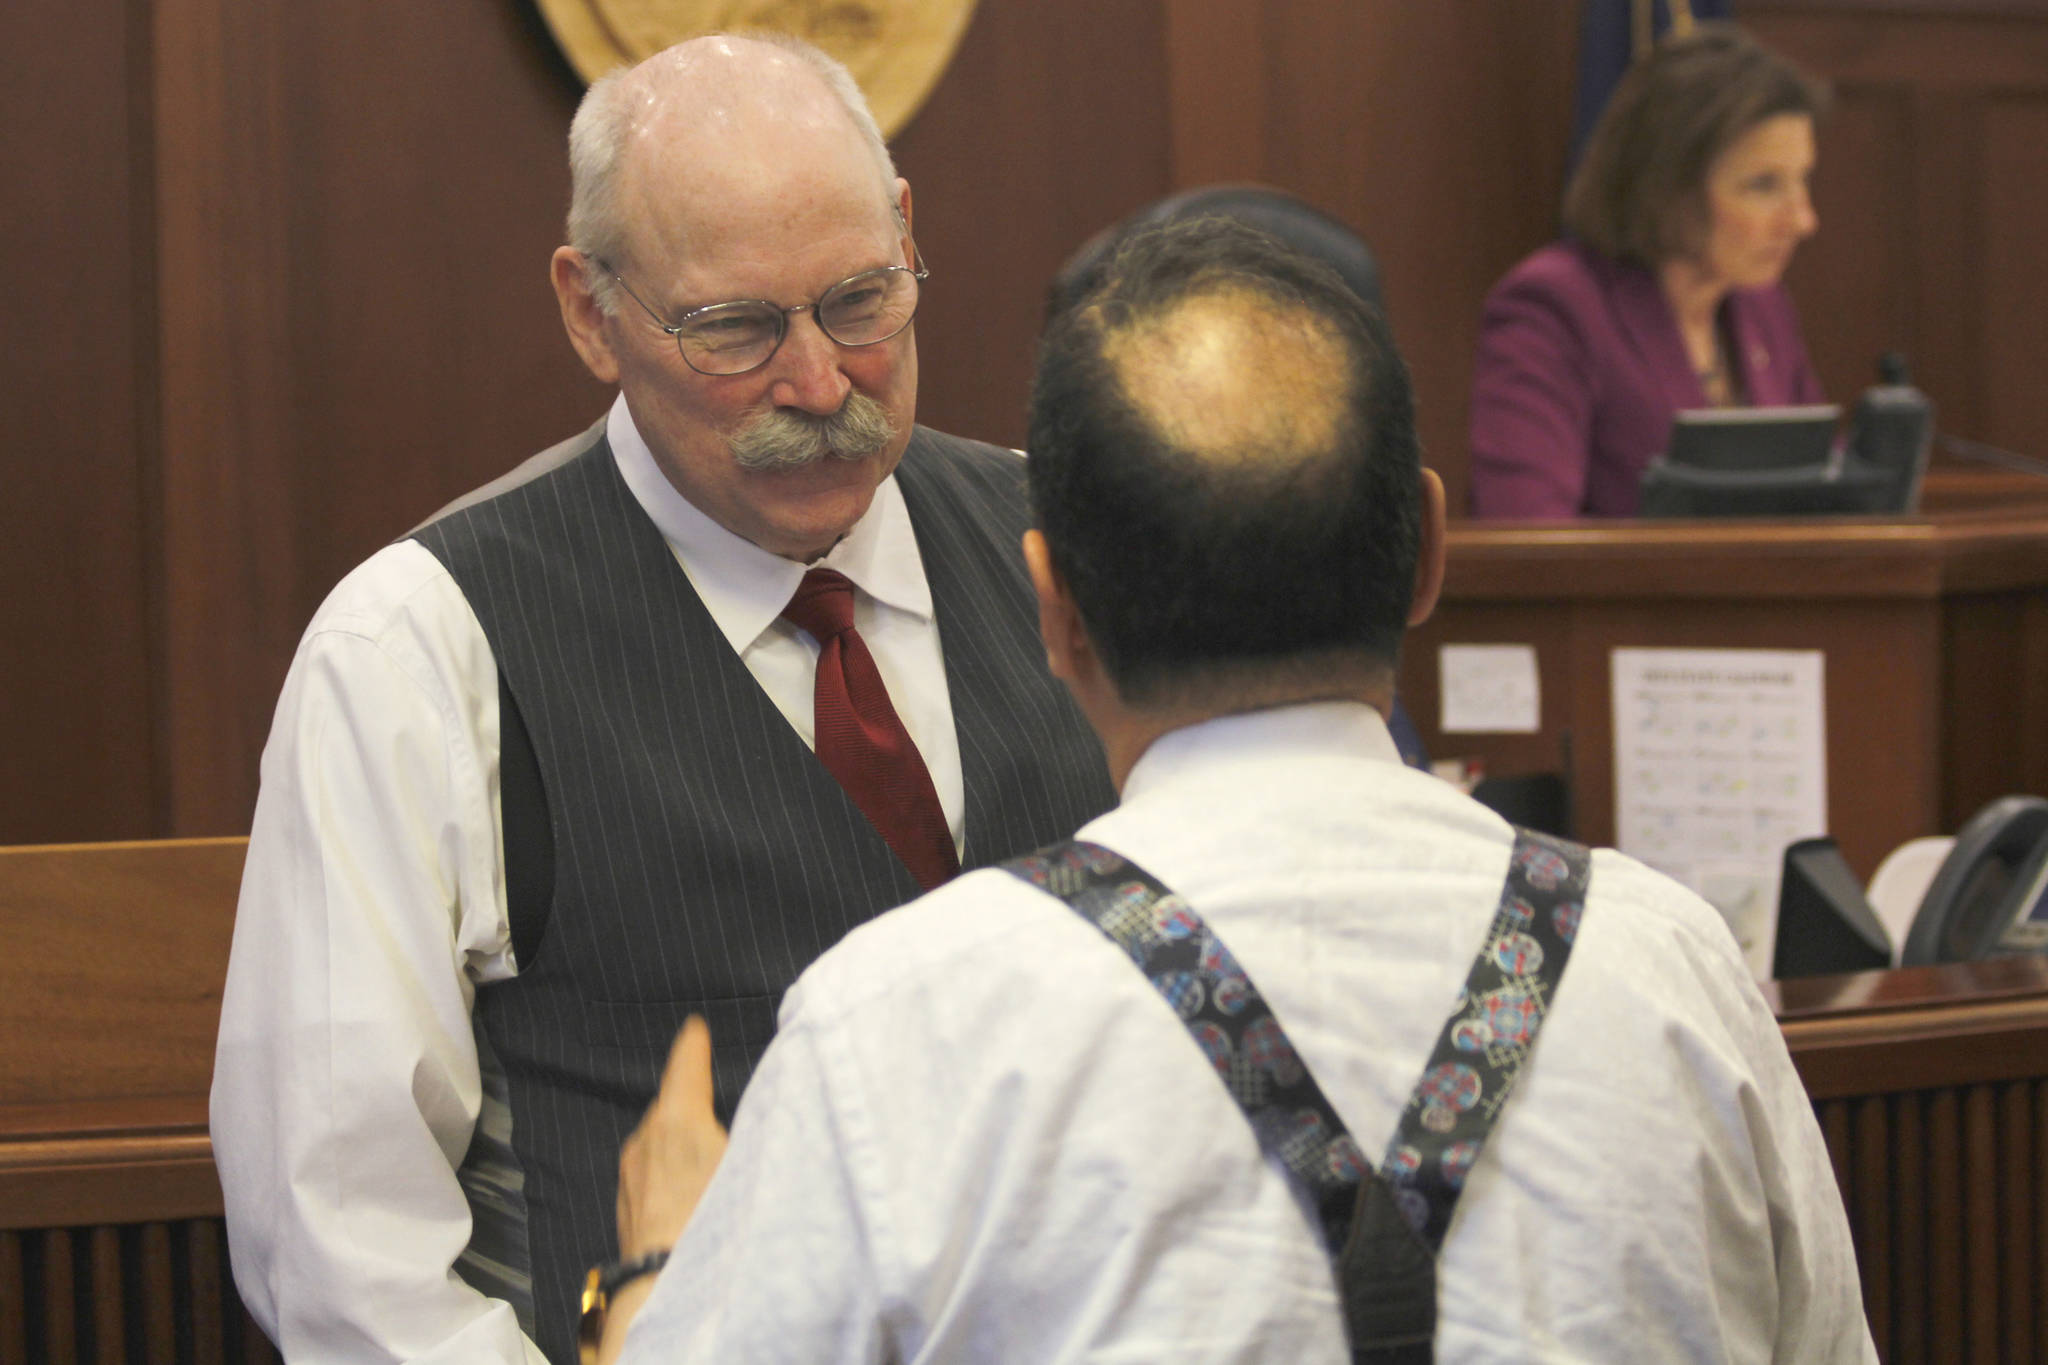 Sen. Bert Stedman, R-Sitka, left, speaks with Sen. Donny Olson, D-Golovin, on the Senate floor at the Alaska State Capitol on Wednesday, May 1, 2019. Senate President Cathy Giessel is pictured in the background. (Alex McCarthy | Juneau Empire)